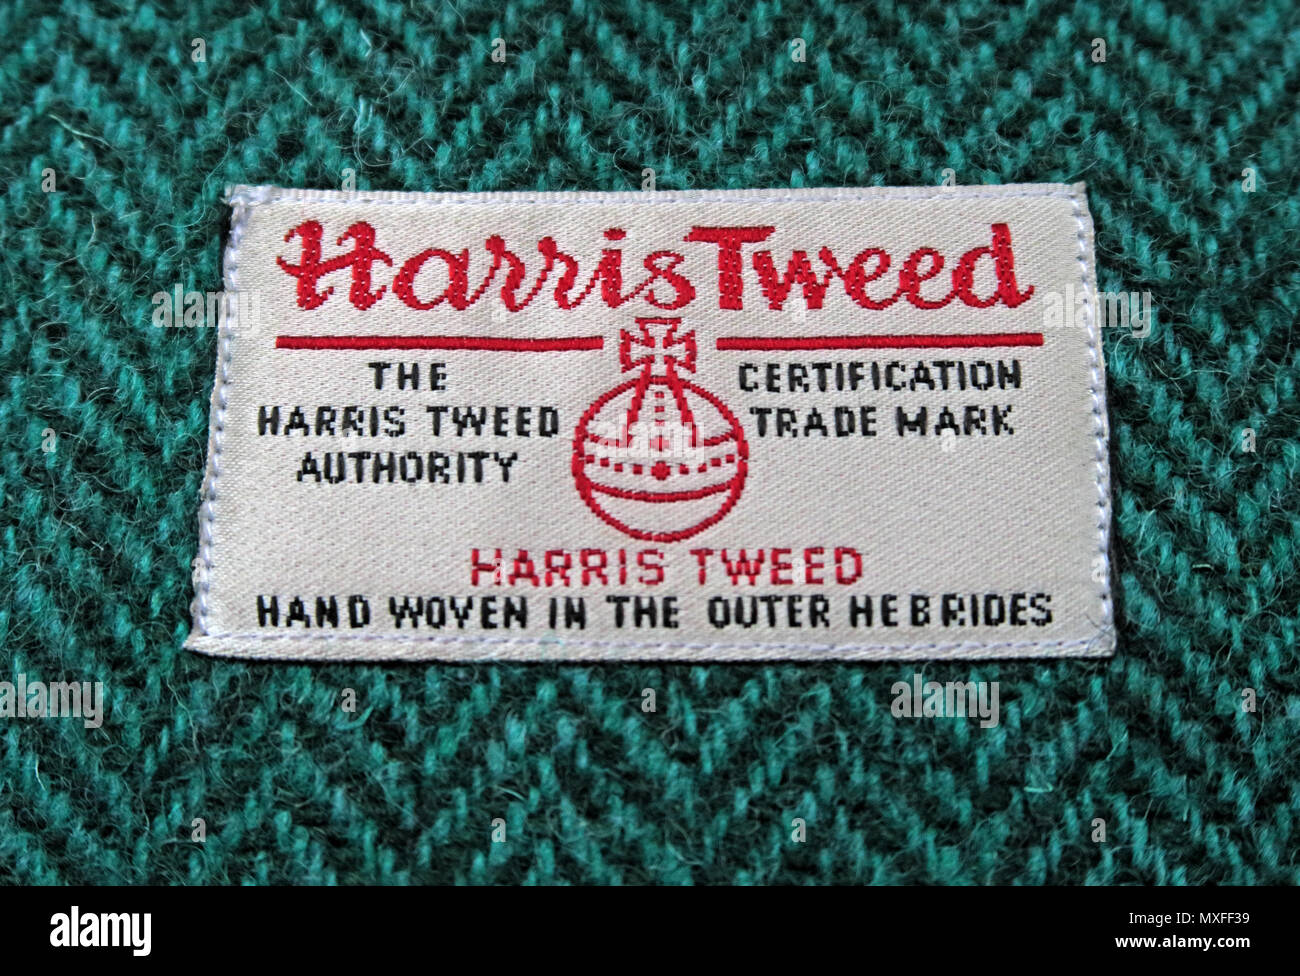 Harris Tweed Authority, Certified Trade Mark, Hand Woven in the Outer Hebrides- Stock Photo